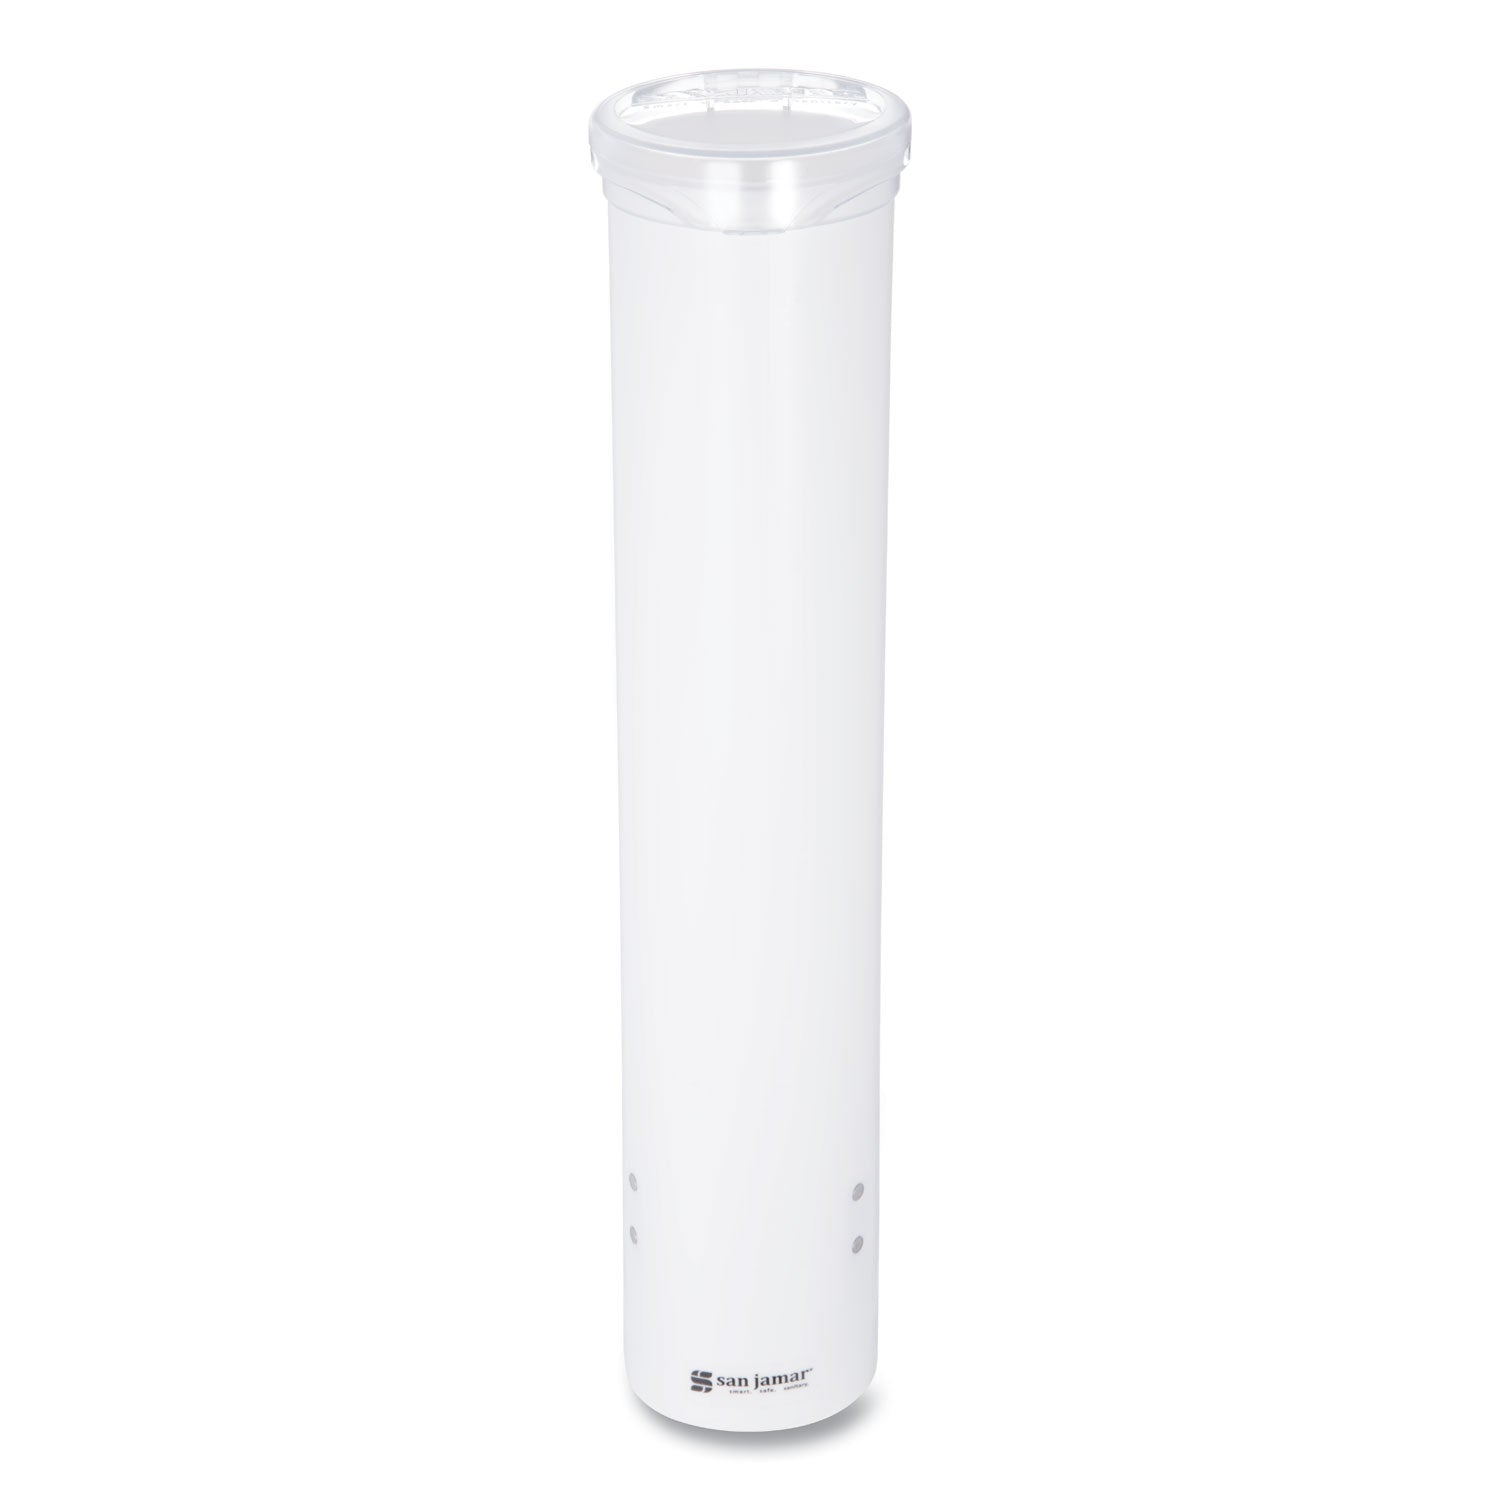 small-pull-type-water-cup-dispenser-for-5-oz-cups-white_sjmc4160wh - 2